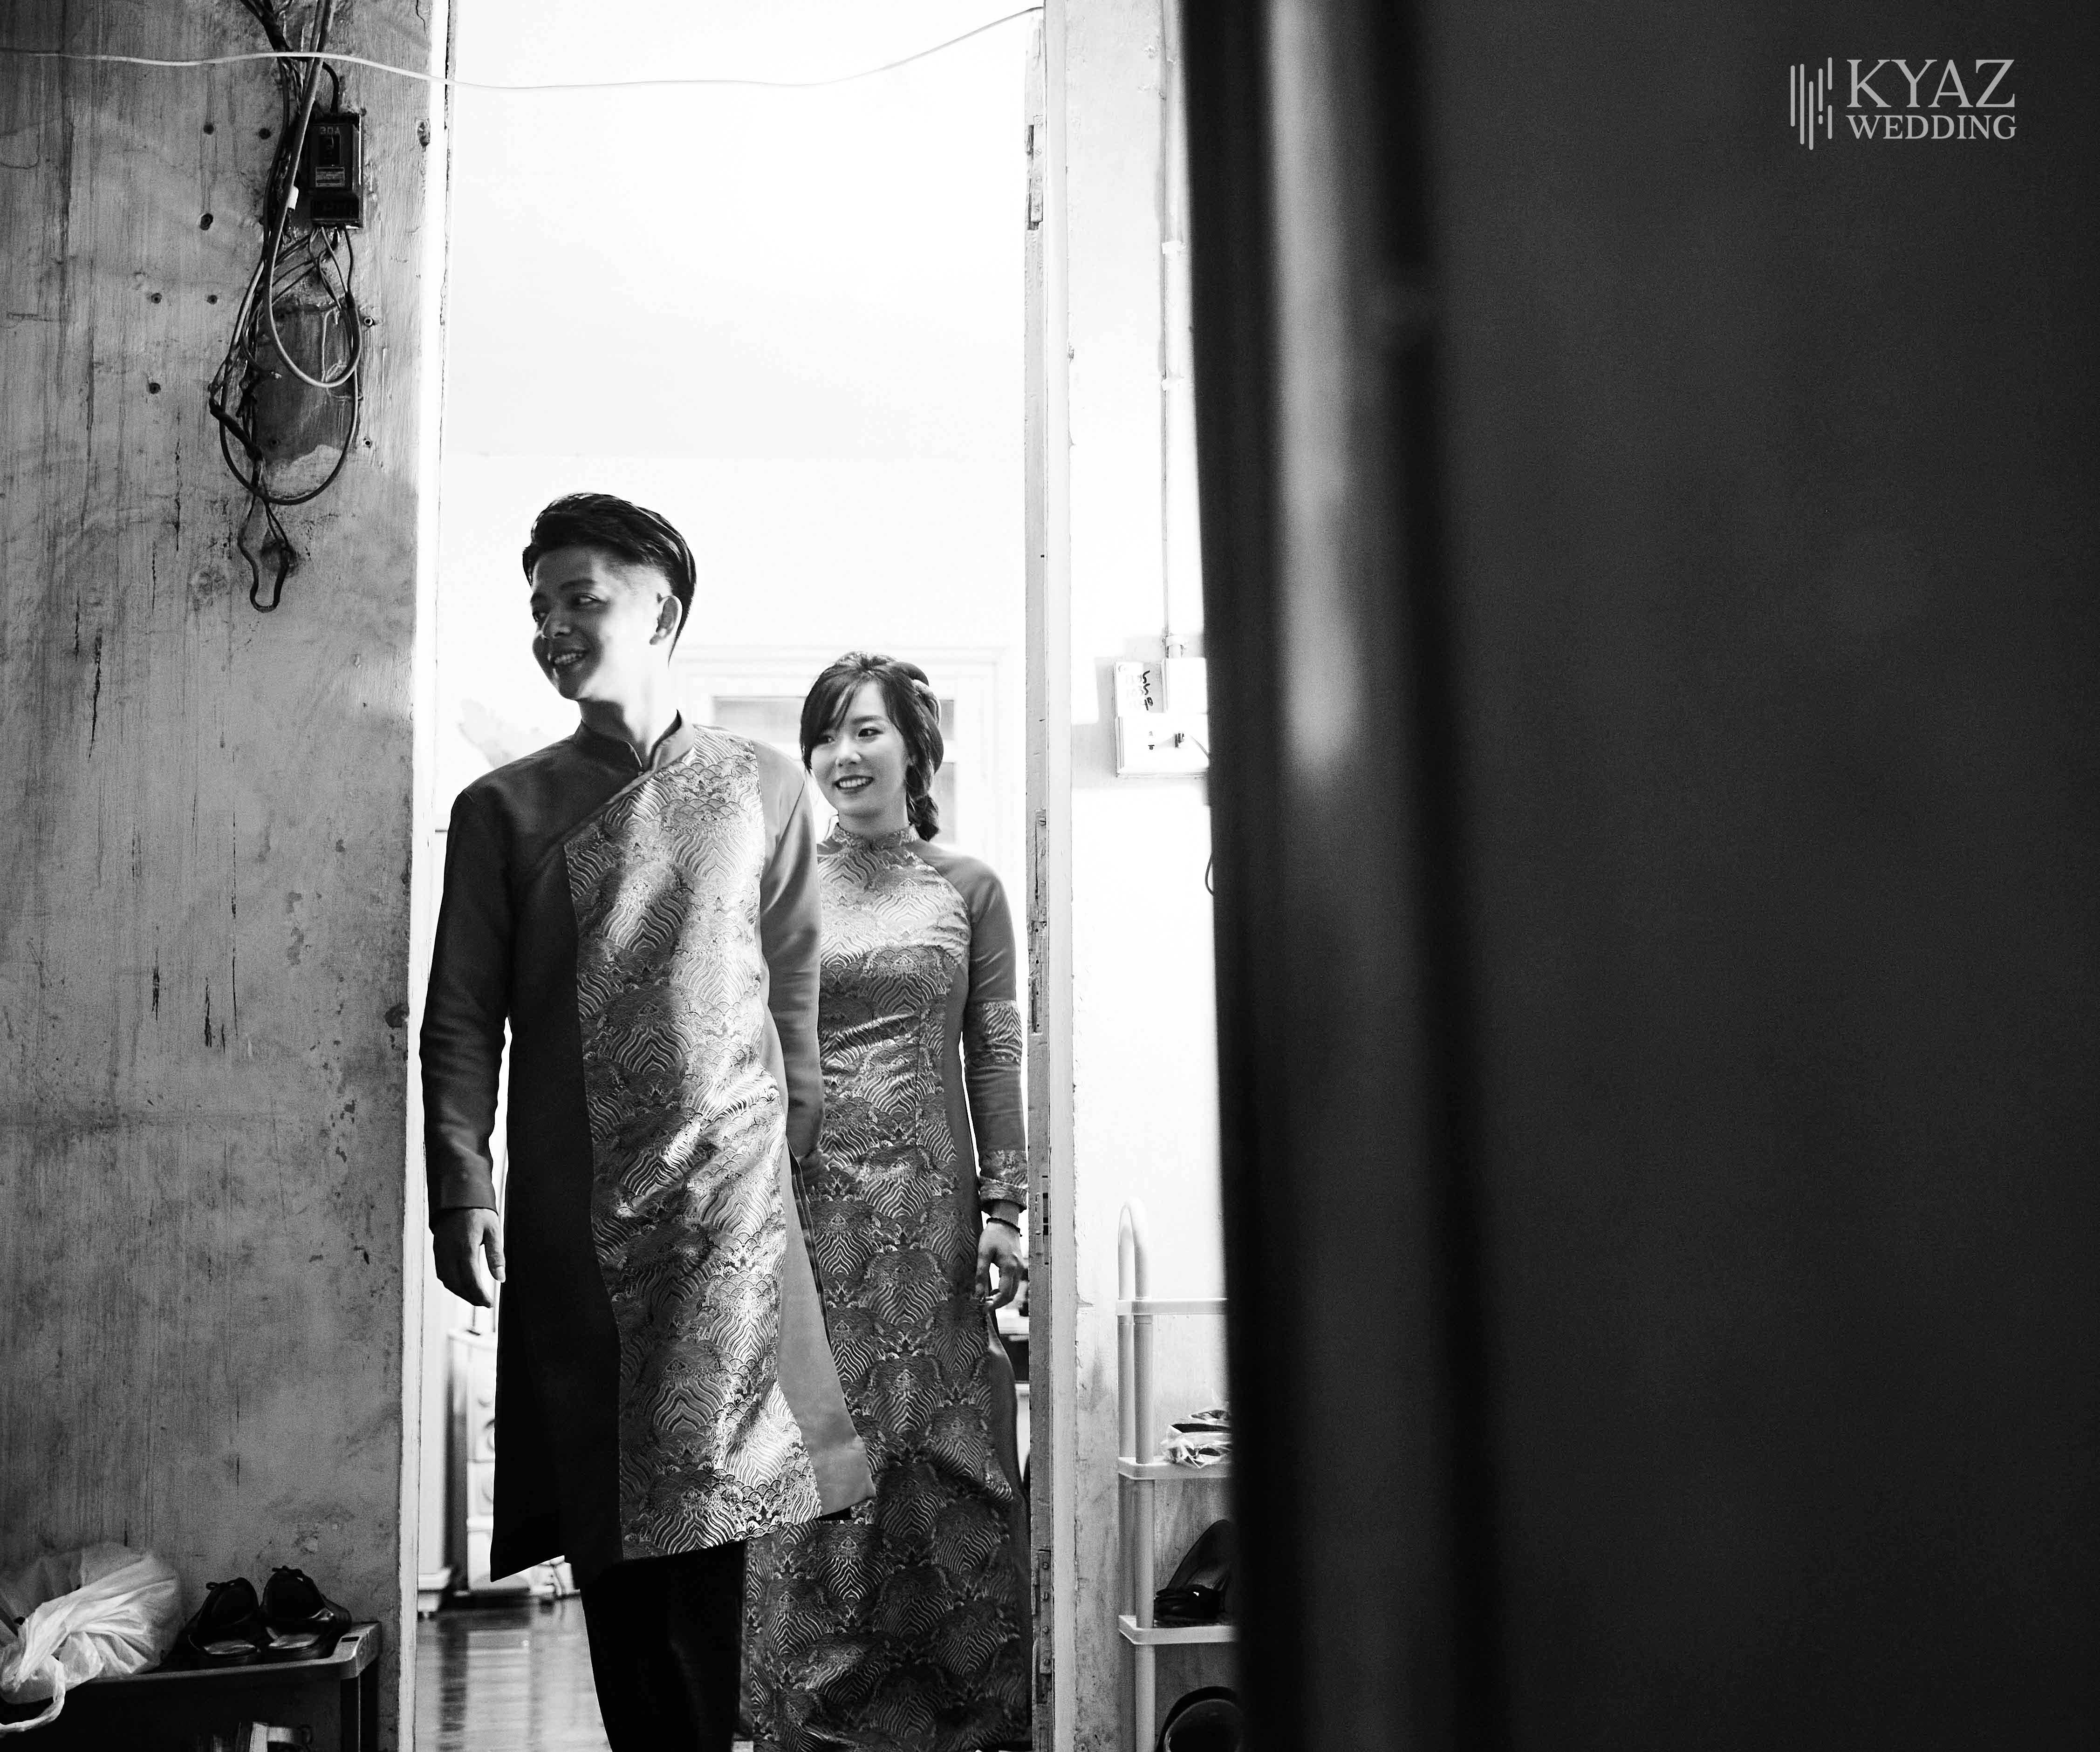 [ CEREMONY PREVIEW ] Hong Phuc & Ngoc Le